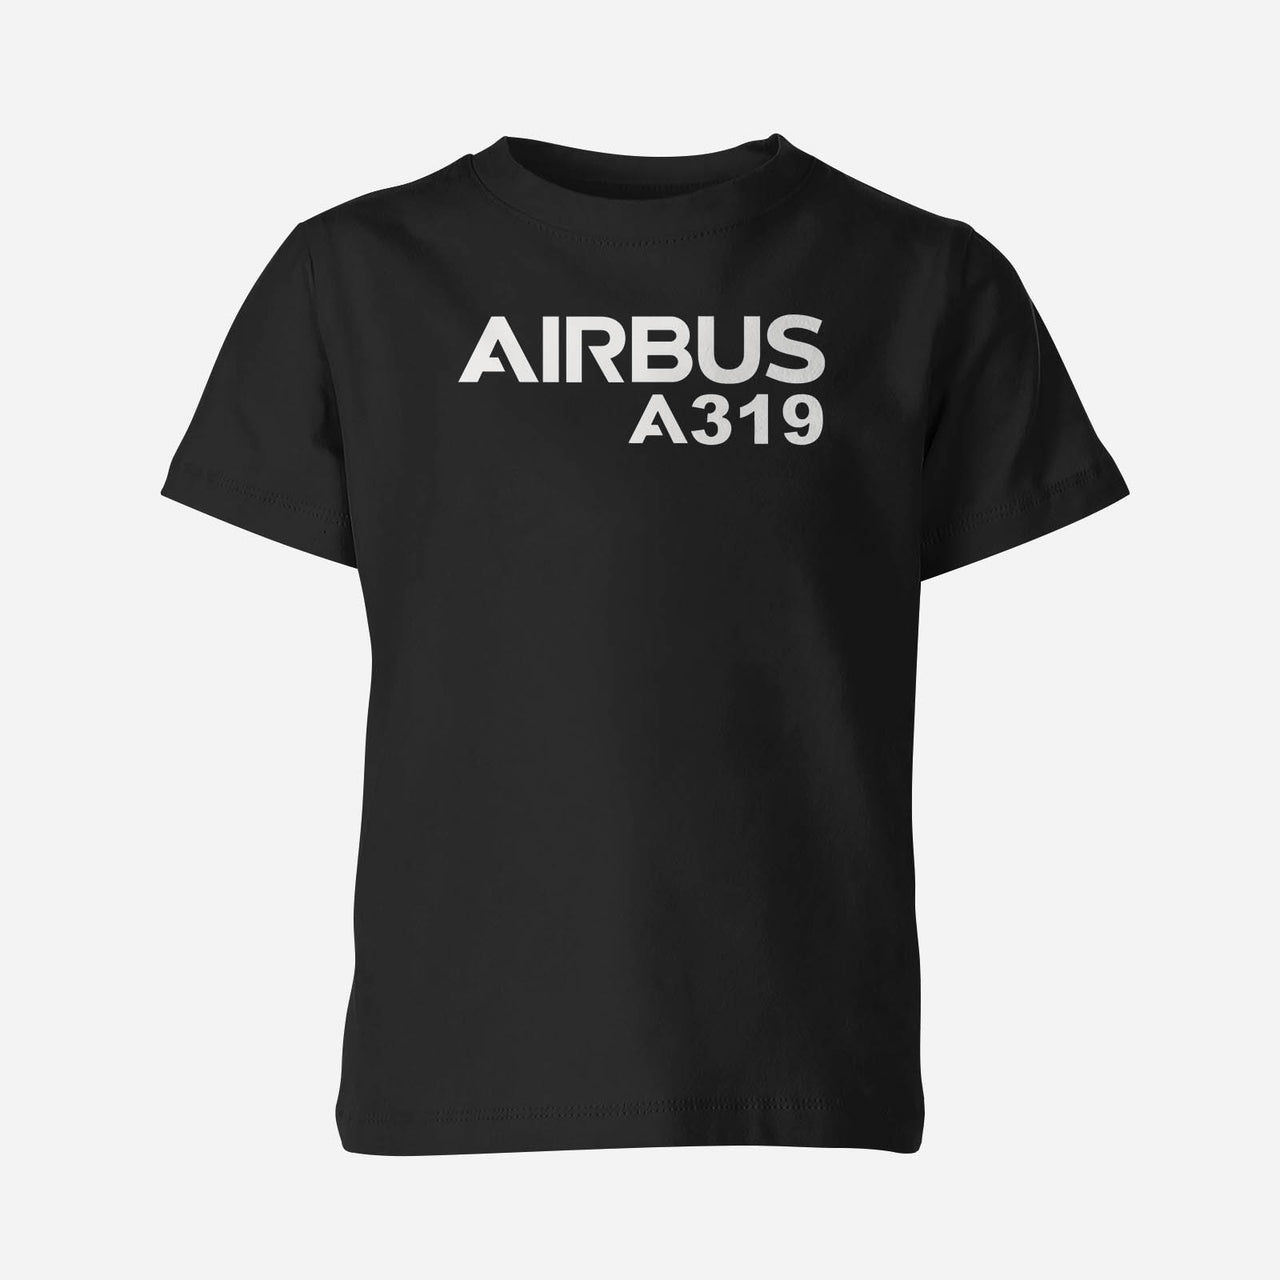 Airbus A319 & Text Designed Children T-Shirts